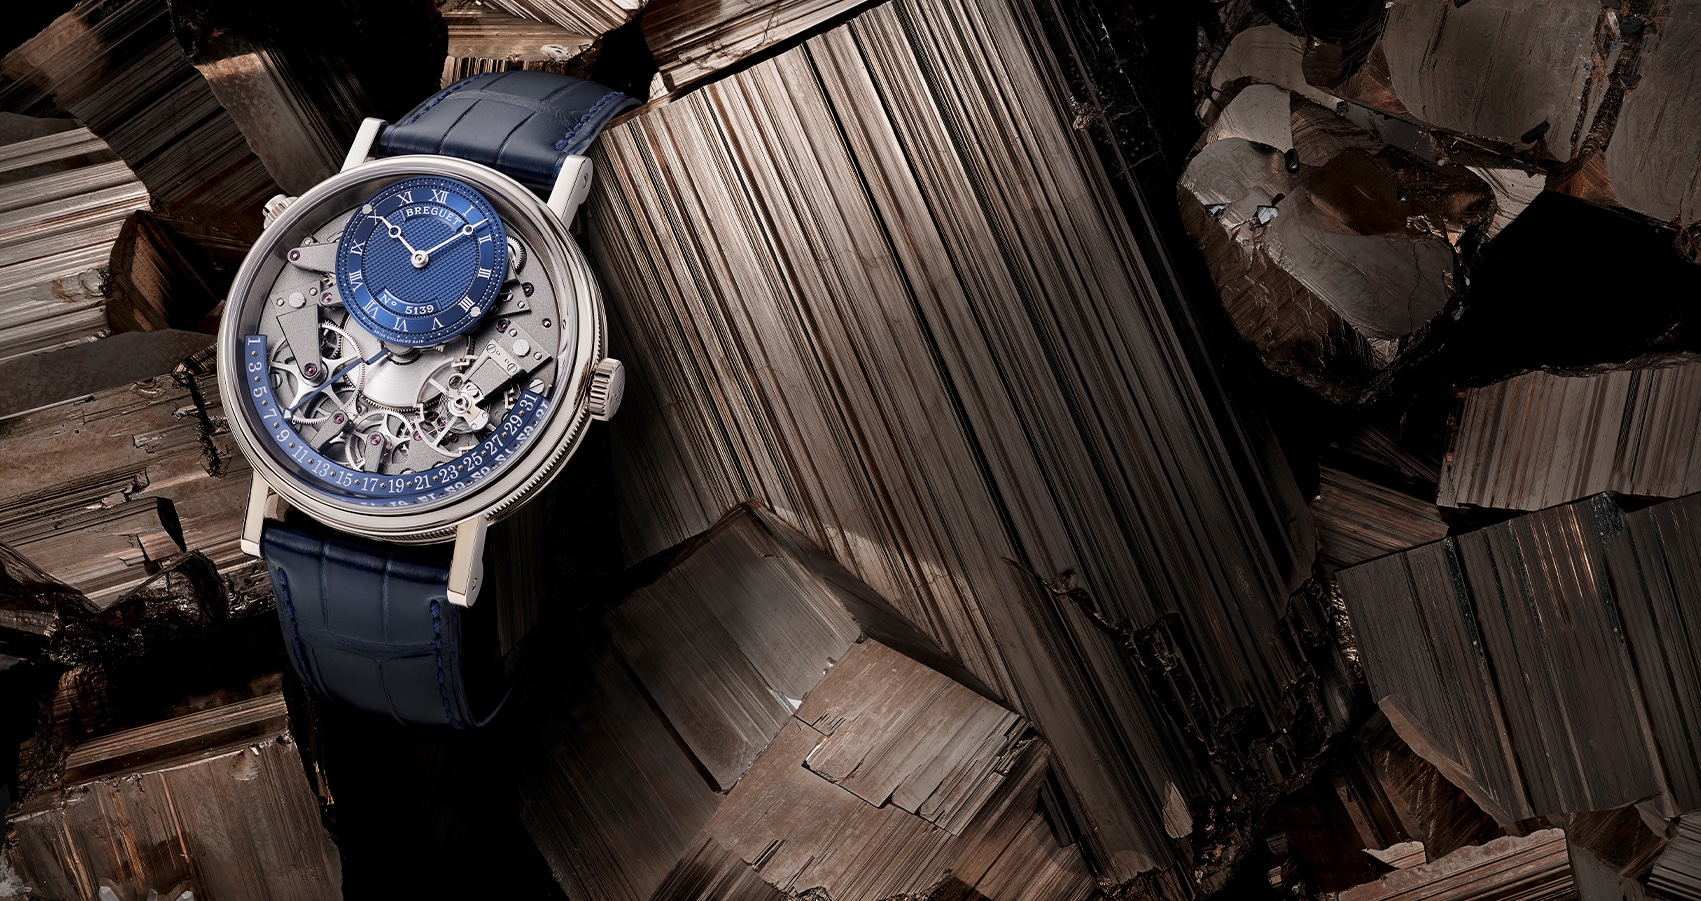 Are Breguet Watches Good? - Luxury Of Watches